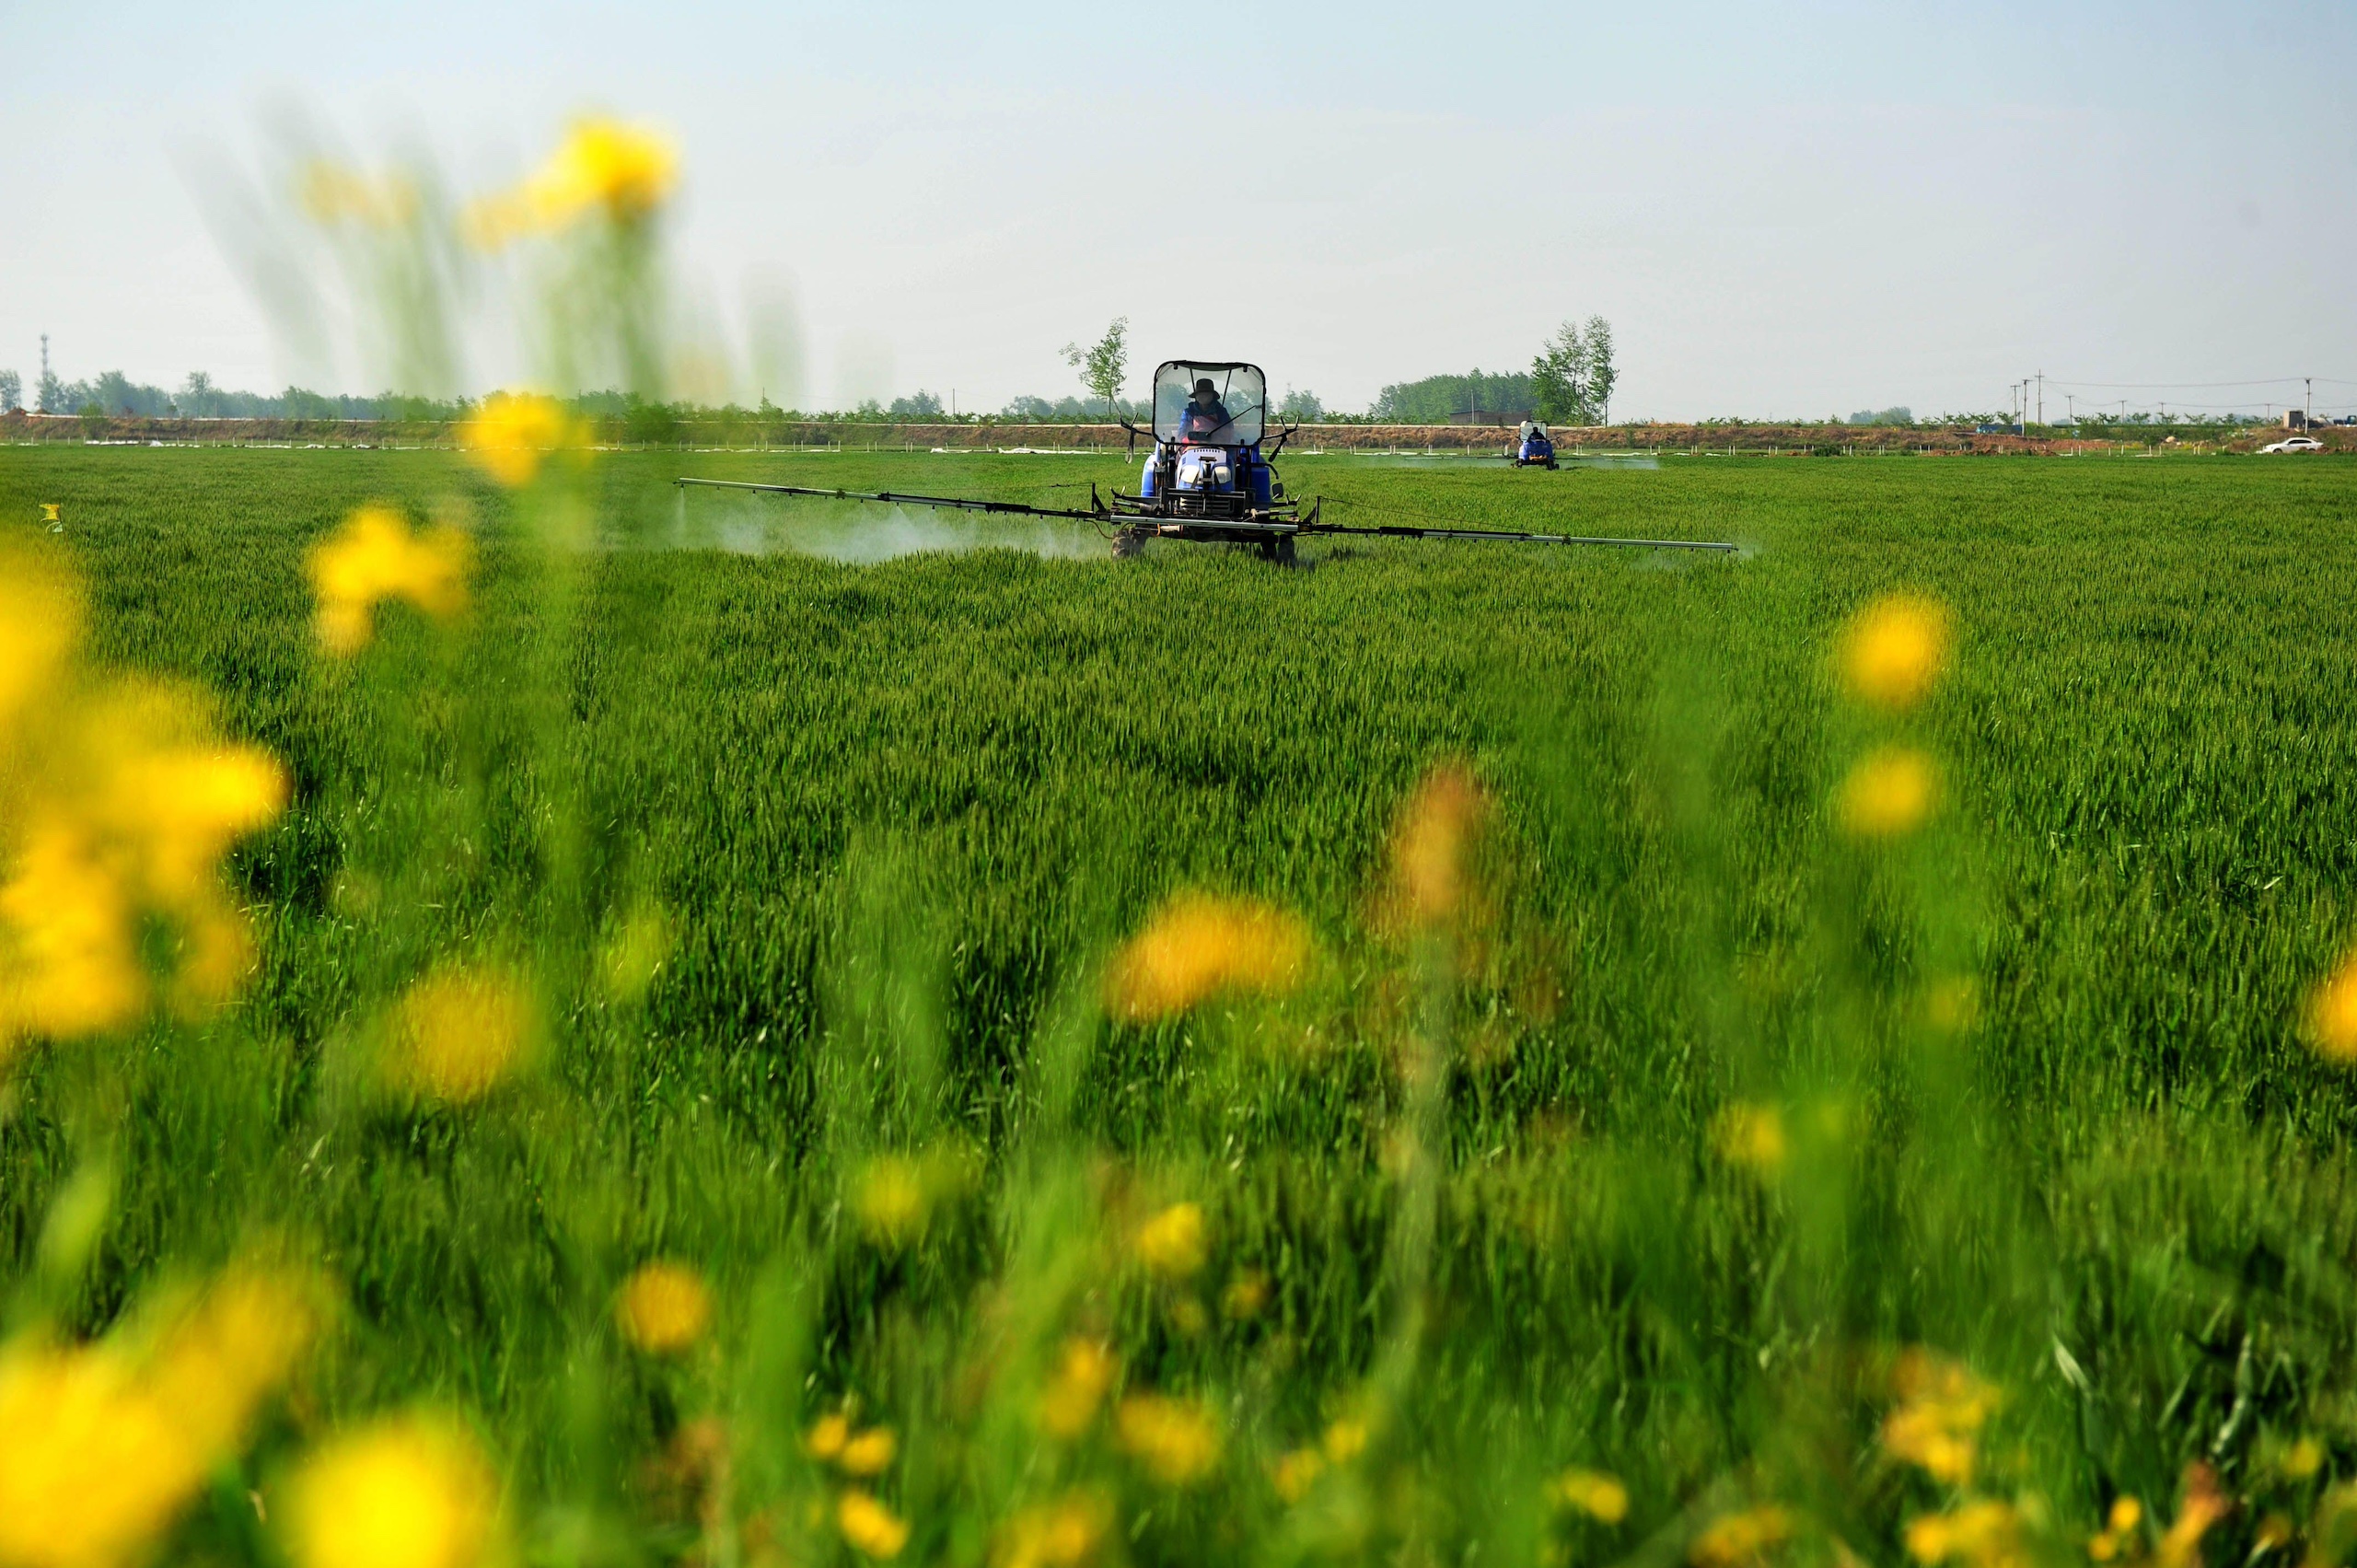 <p>Spraying pesticide on a wheat field in Jiangsu province. Companies may soon be expected to measure and report their impact on nature. (Image: Hong Xing / Alamy)</p>